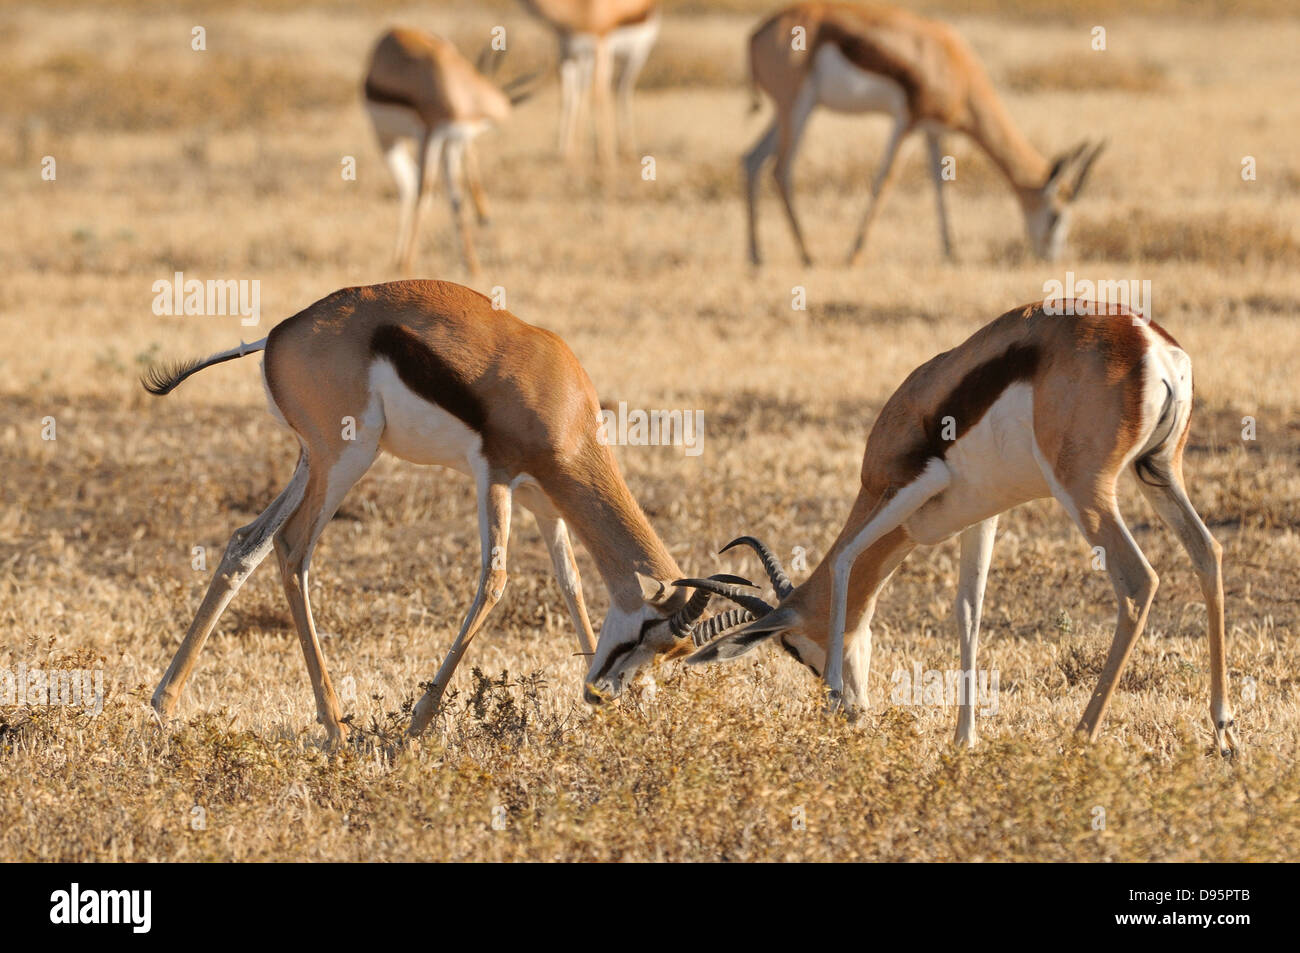 Springbok Antidorcas marsupialis Males fighting Photographed in Kgalagadi National Park, South Africa Stock Photo